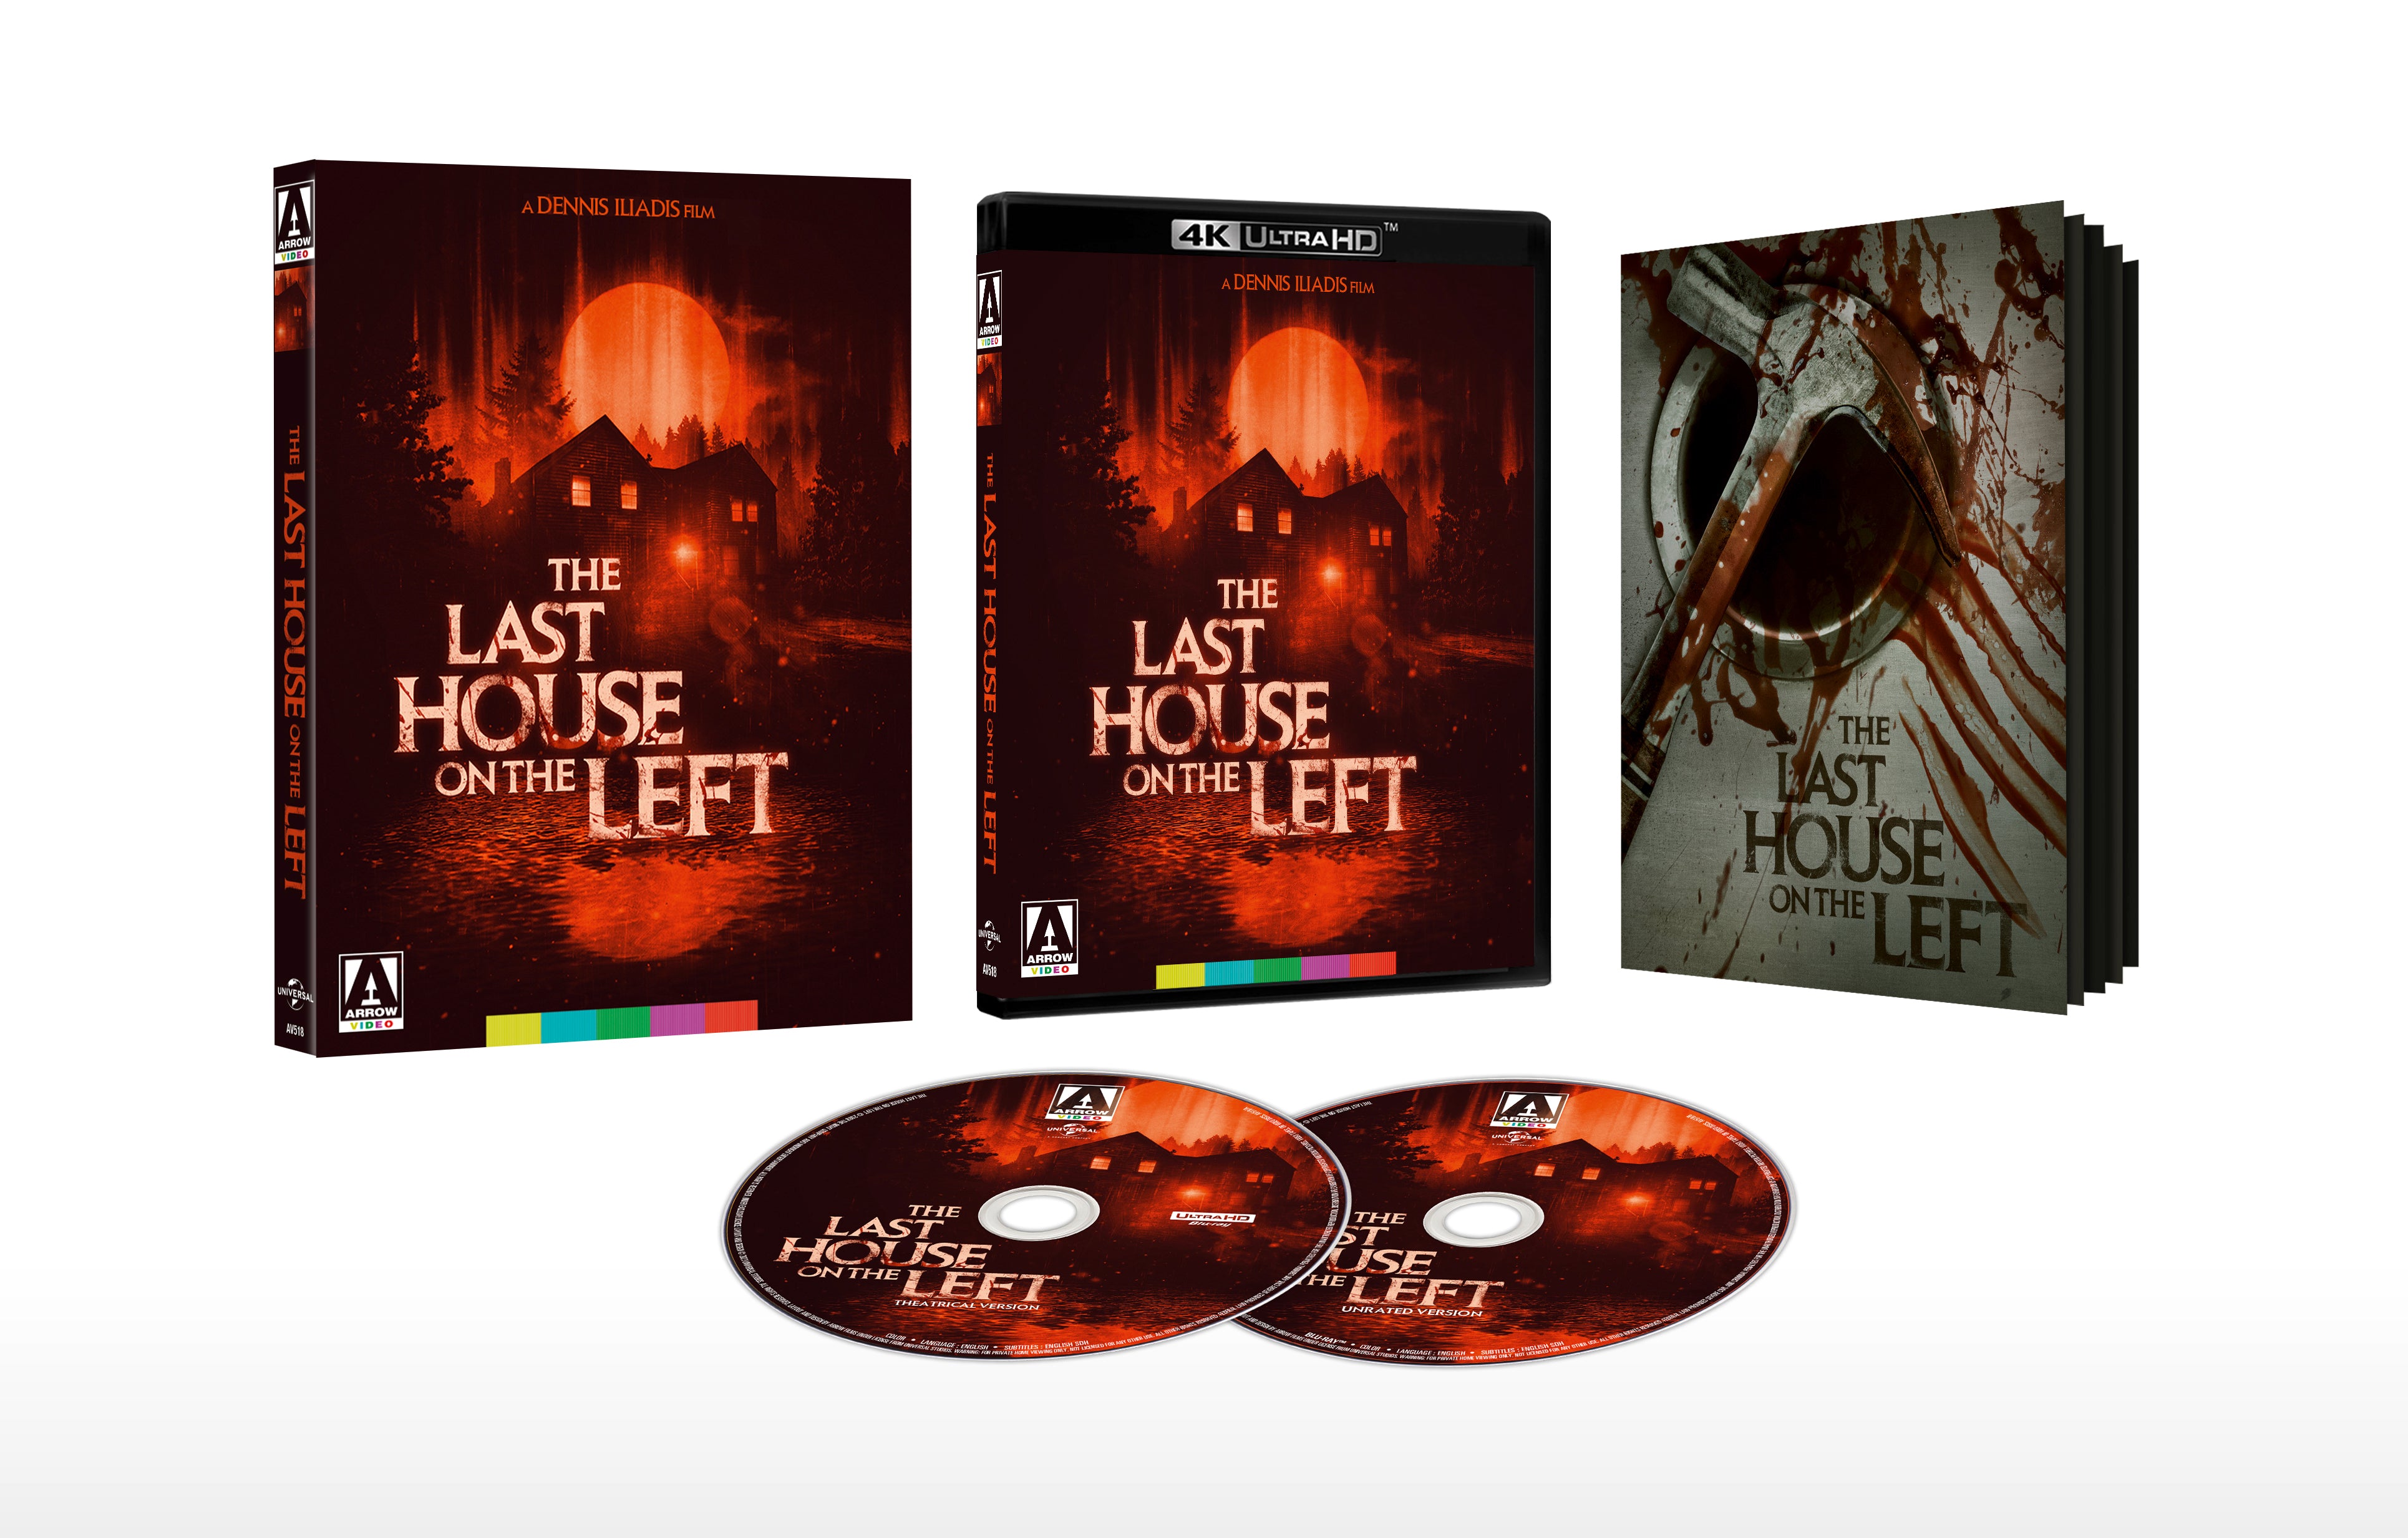 THE LAST HOUSE ON THE LEFT 2009 (LIMITED EDITION) 4K UHD/BLU-RAY